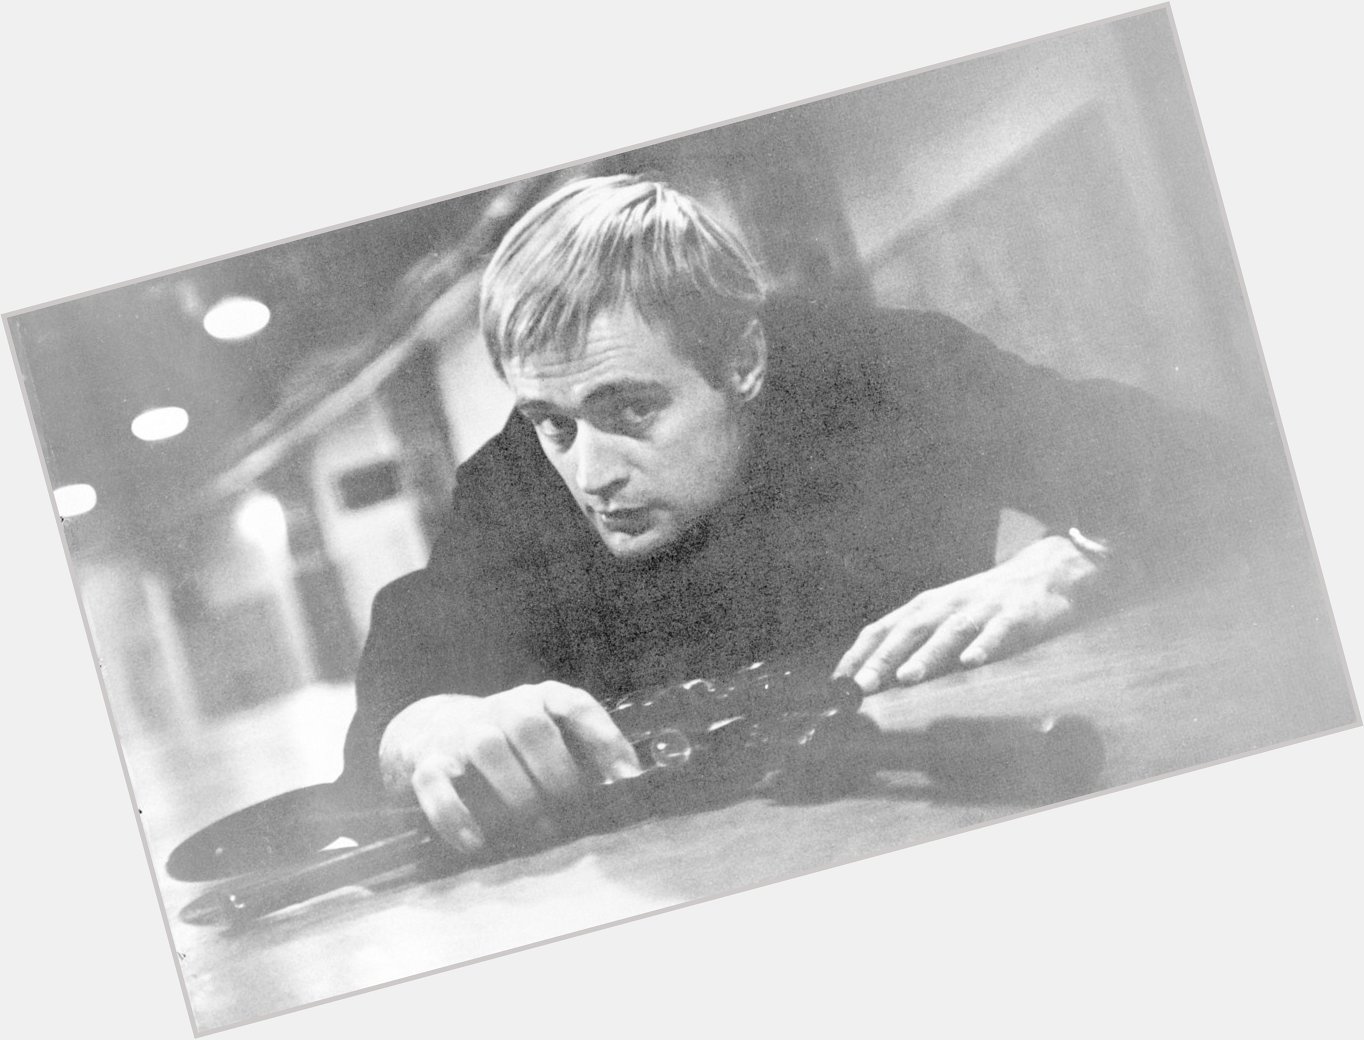 A very happy birthday today to The Man From UNCLE\s David McCallum! 